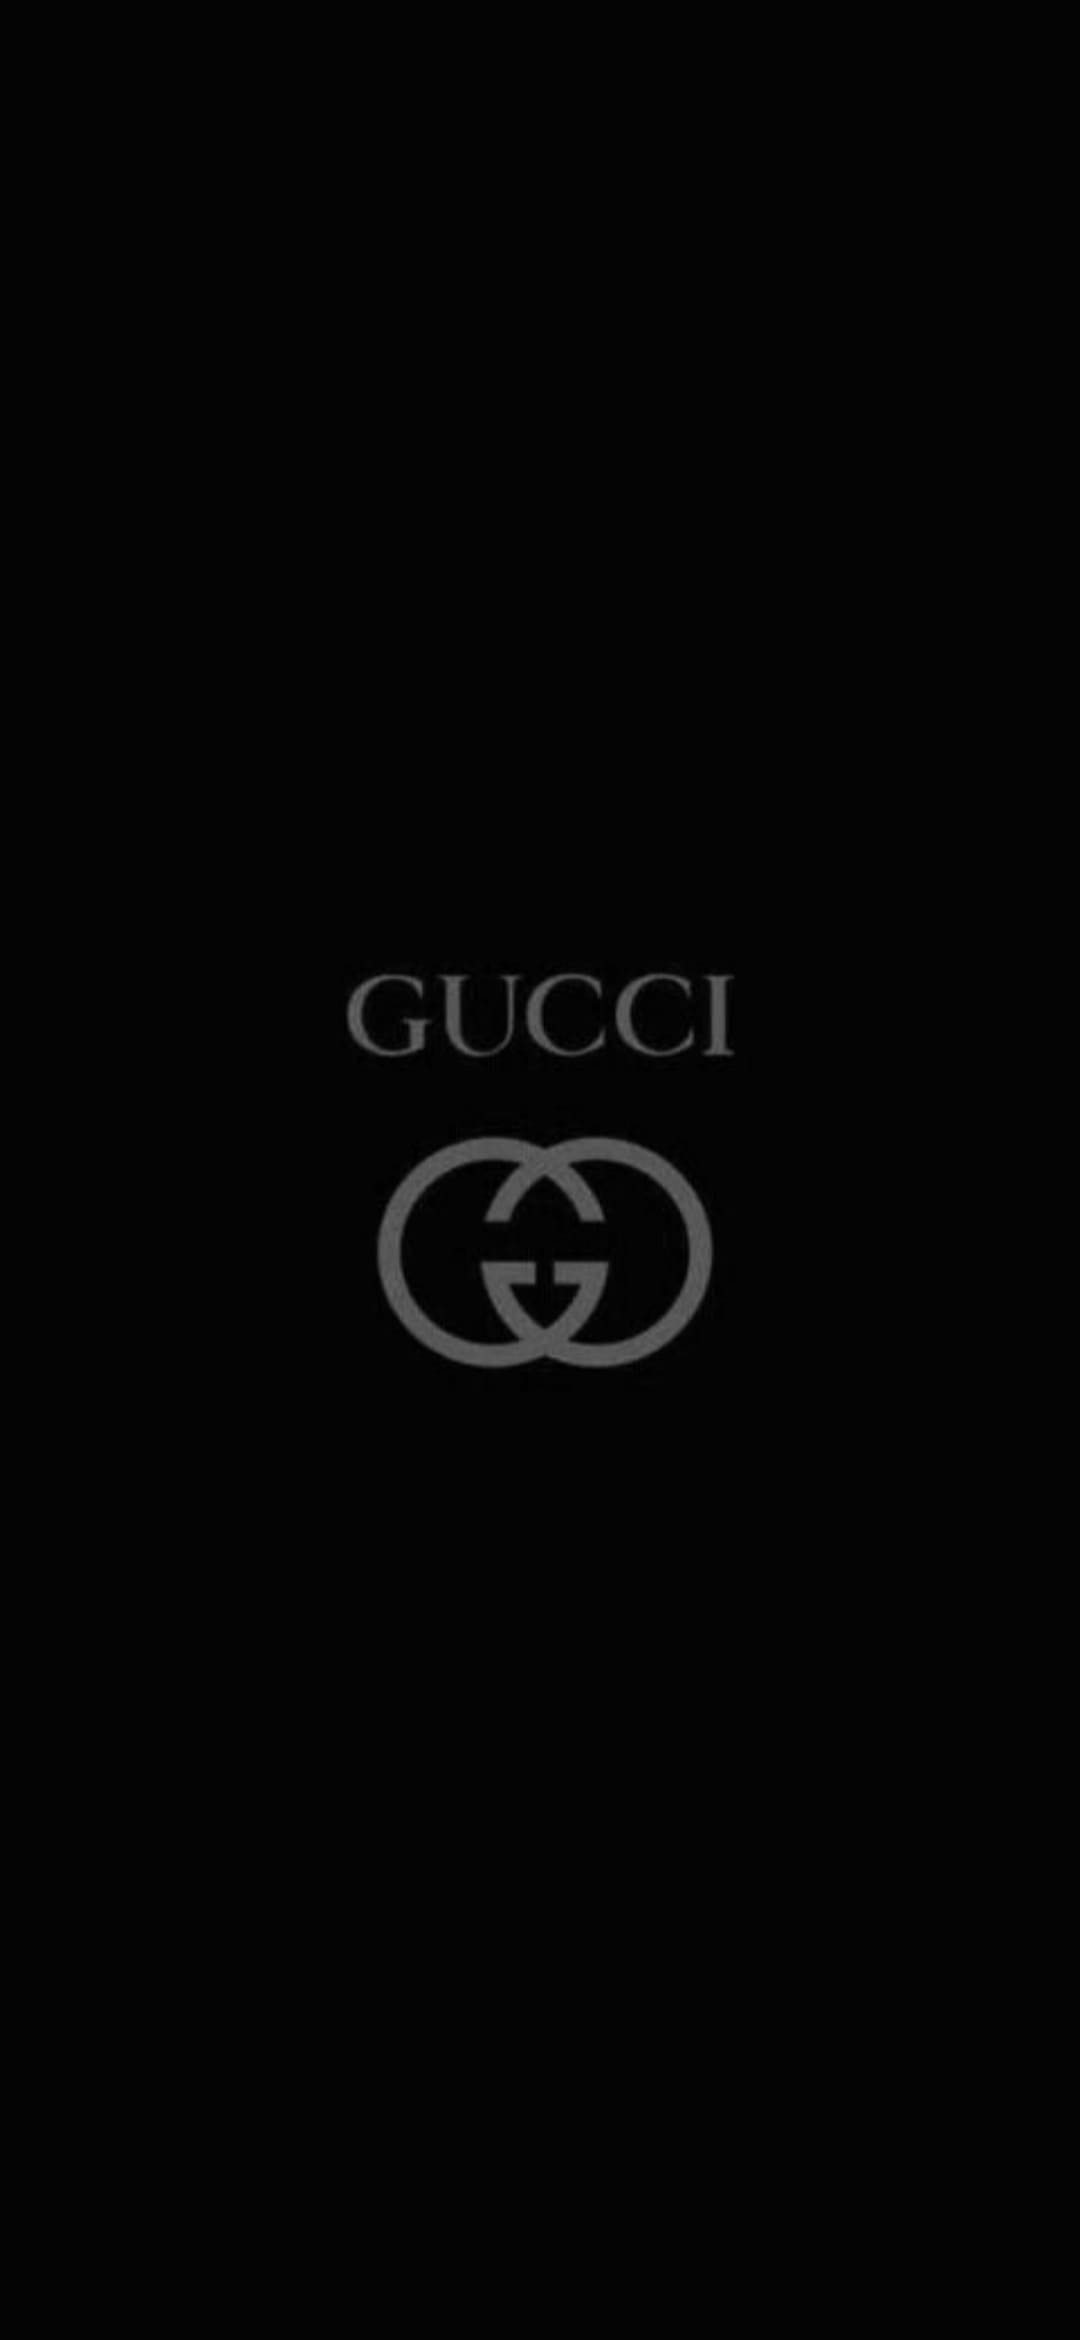 Gucci Wallpaper Discover more Apple Background Iphone Louis Vuitton  Supreme wallpapers   Gucci wallpaper iphone Nature iphone wallpaper  Hypebeast wallpaper